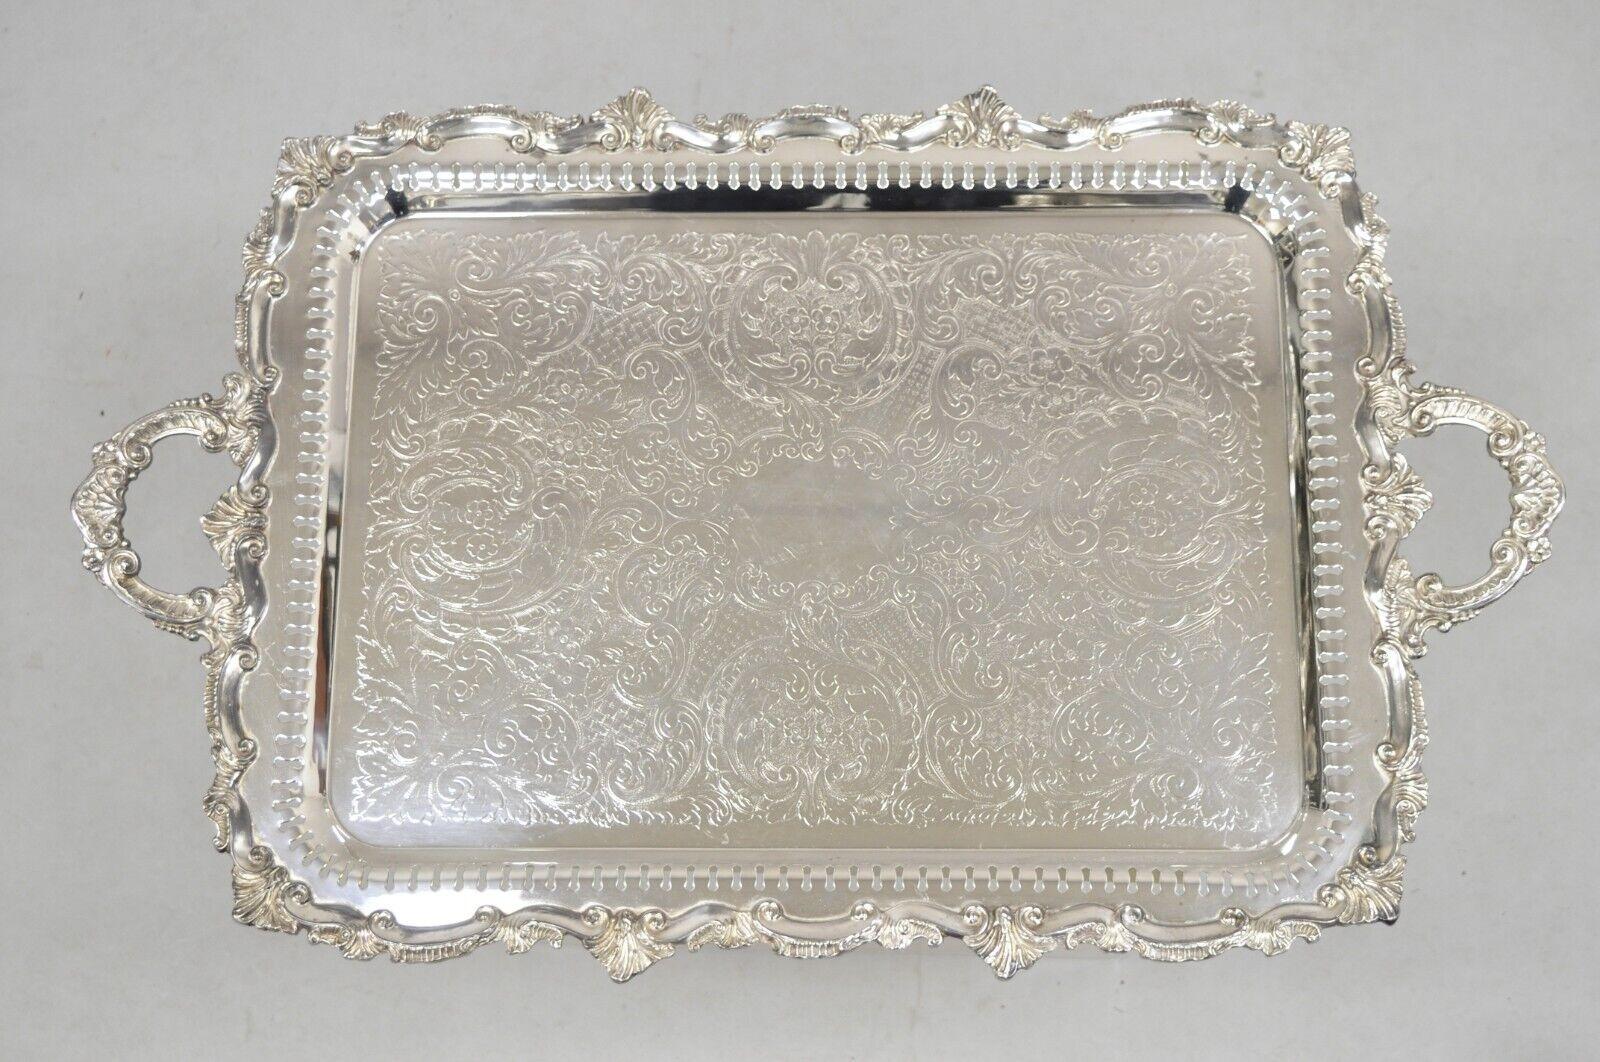 Vtg English Victorian Large Silver Plated Pierced Gallery Serving Platter Tray For Sale 8